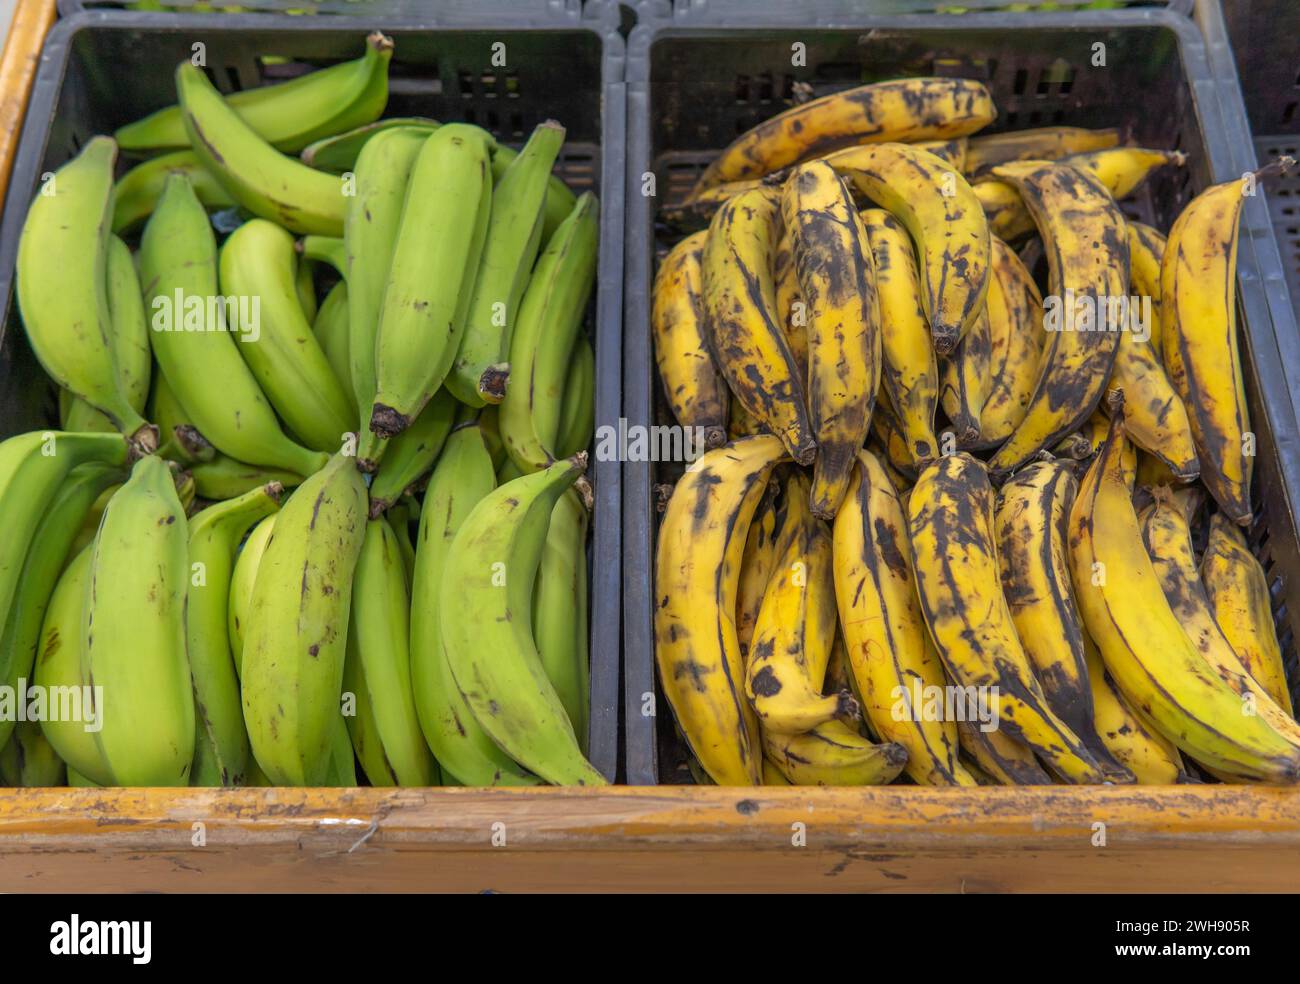 A drawer with green bananas next to one with ripe bananas that are used to prepare different Latin American foods Stock Photo